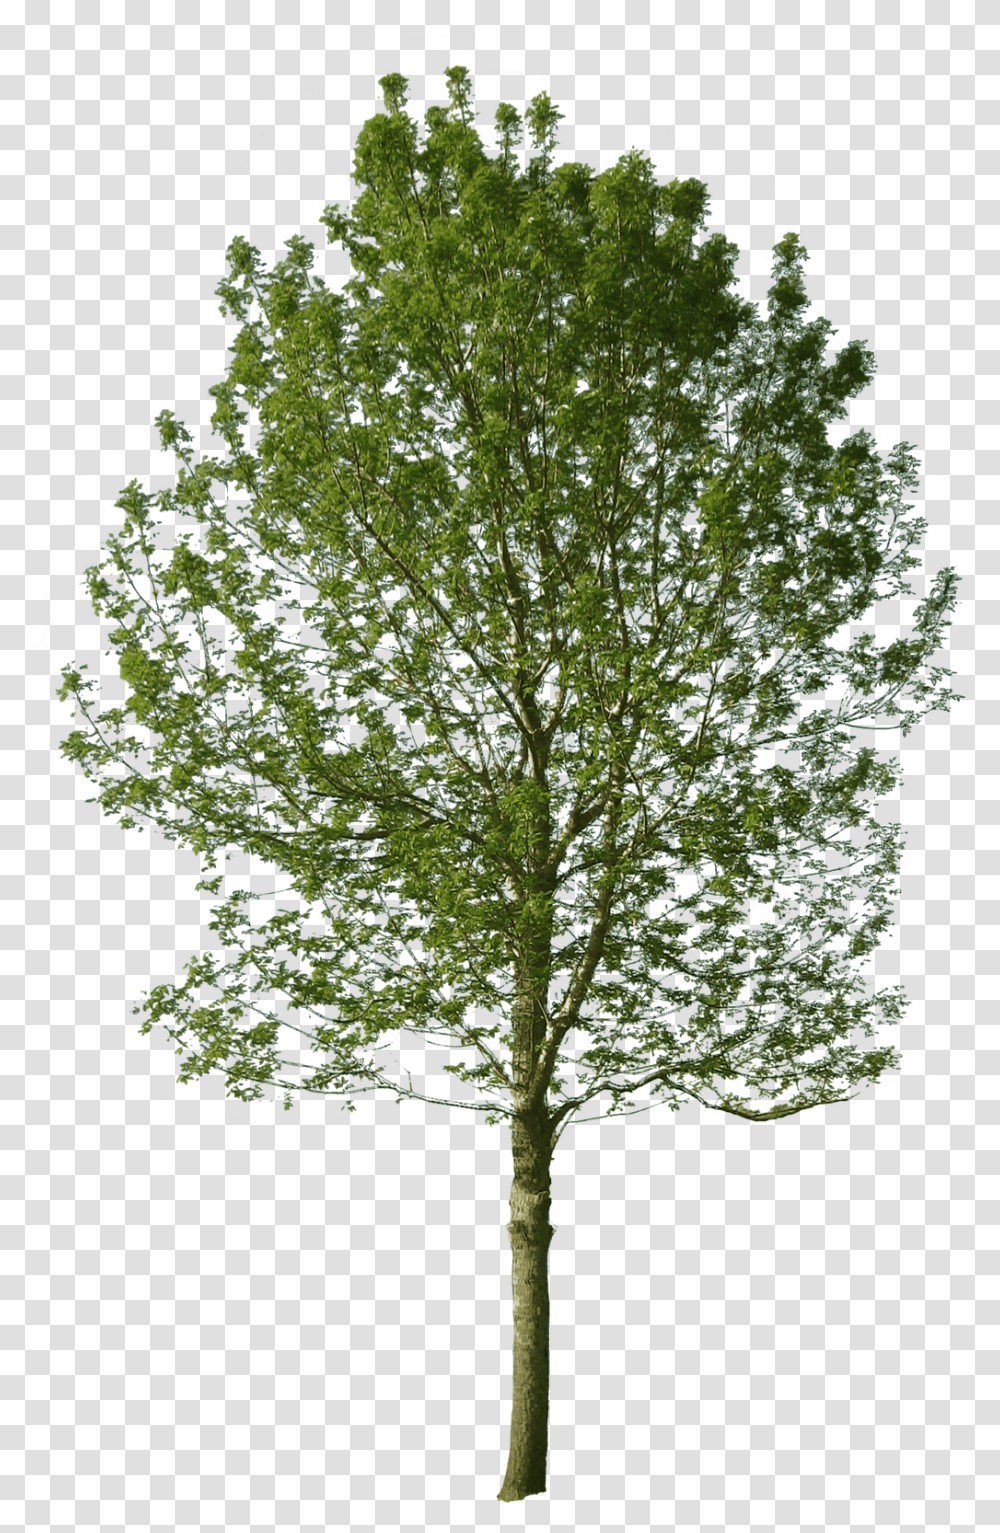 Summer Pond V53 Picture Cut Out Tree Photoshop, Plant, Tree Trunk, Oak, Maple Transparent Png